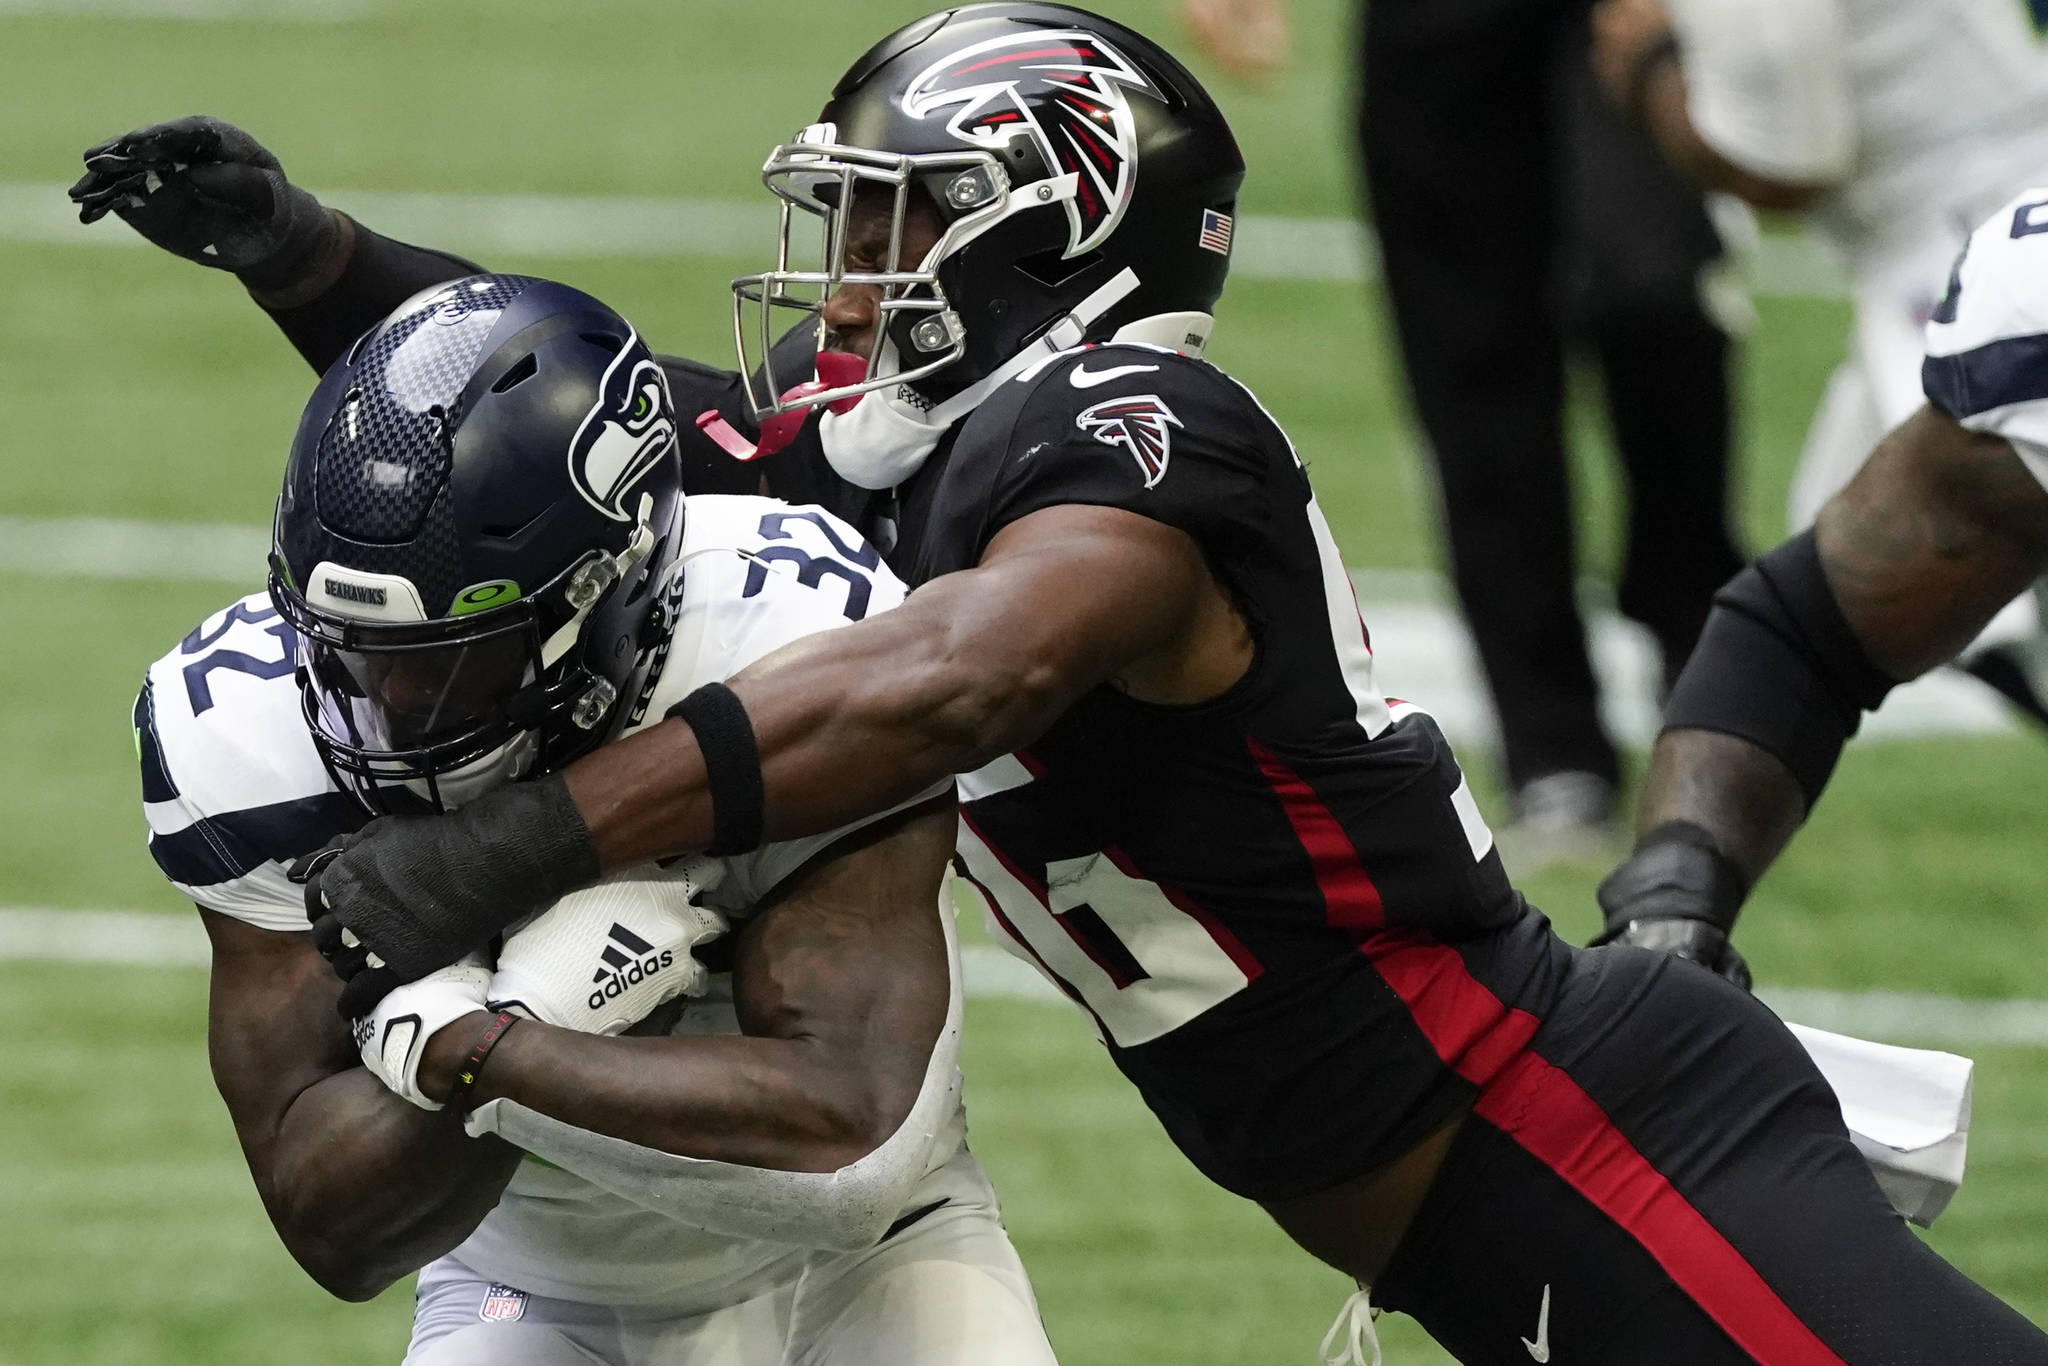 Grading the Seahawks' 38-25 victory over the Falcons